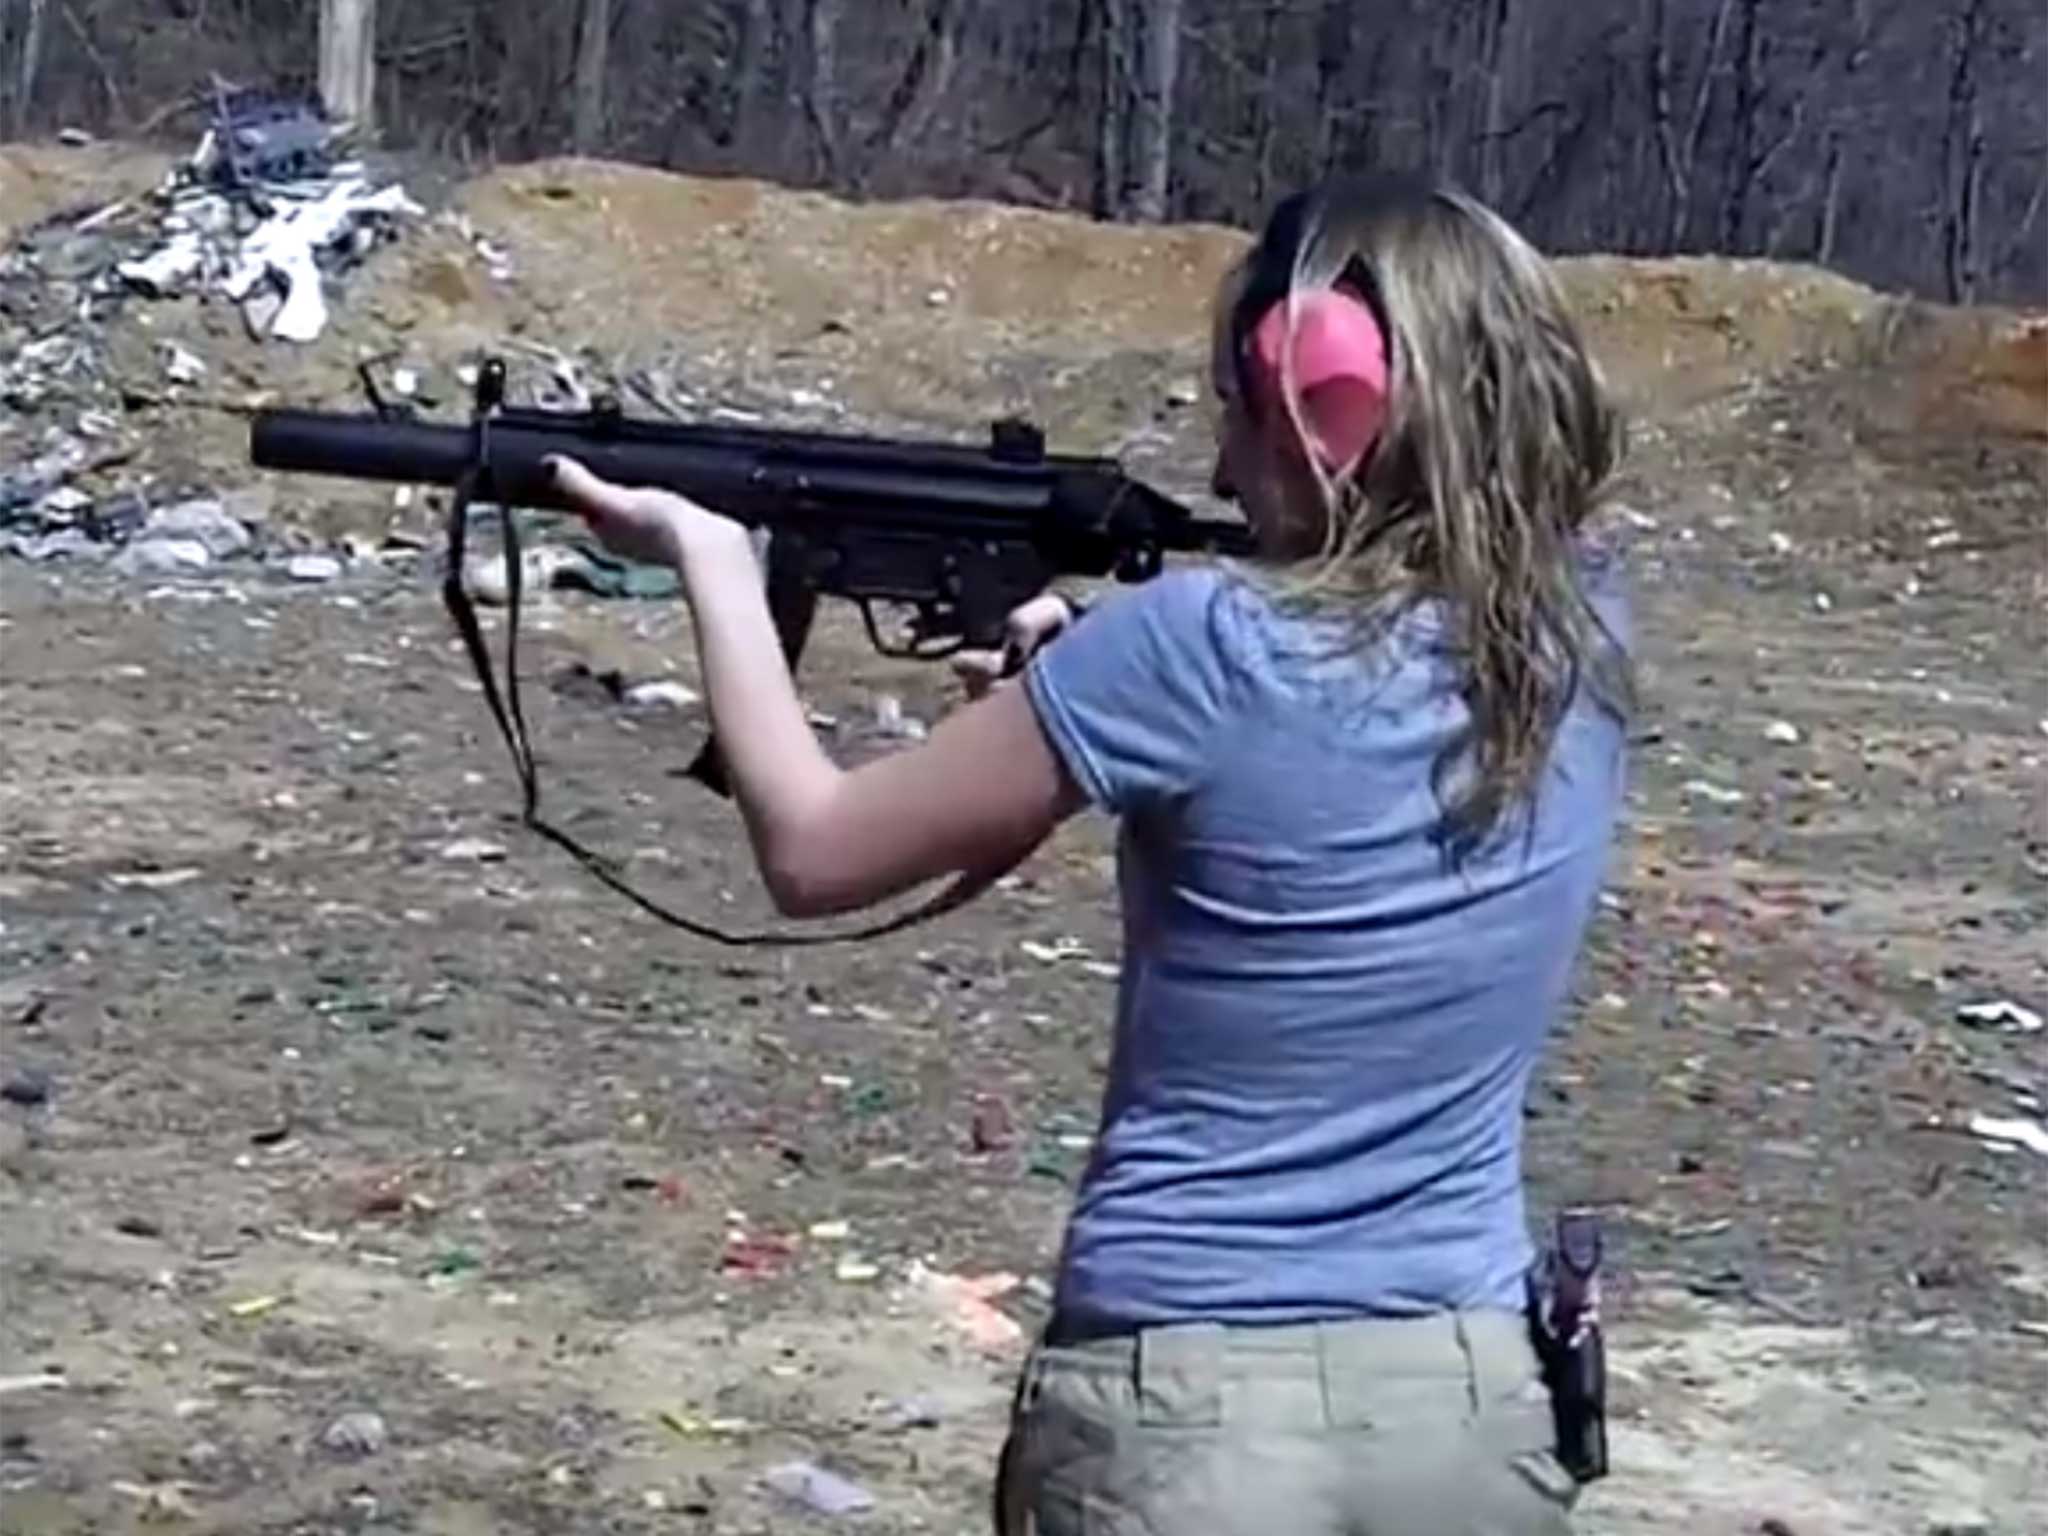 Ed Levine's daughter 'bull's eye Brookie' fires off a round